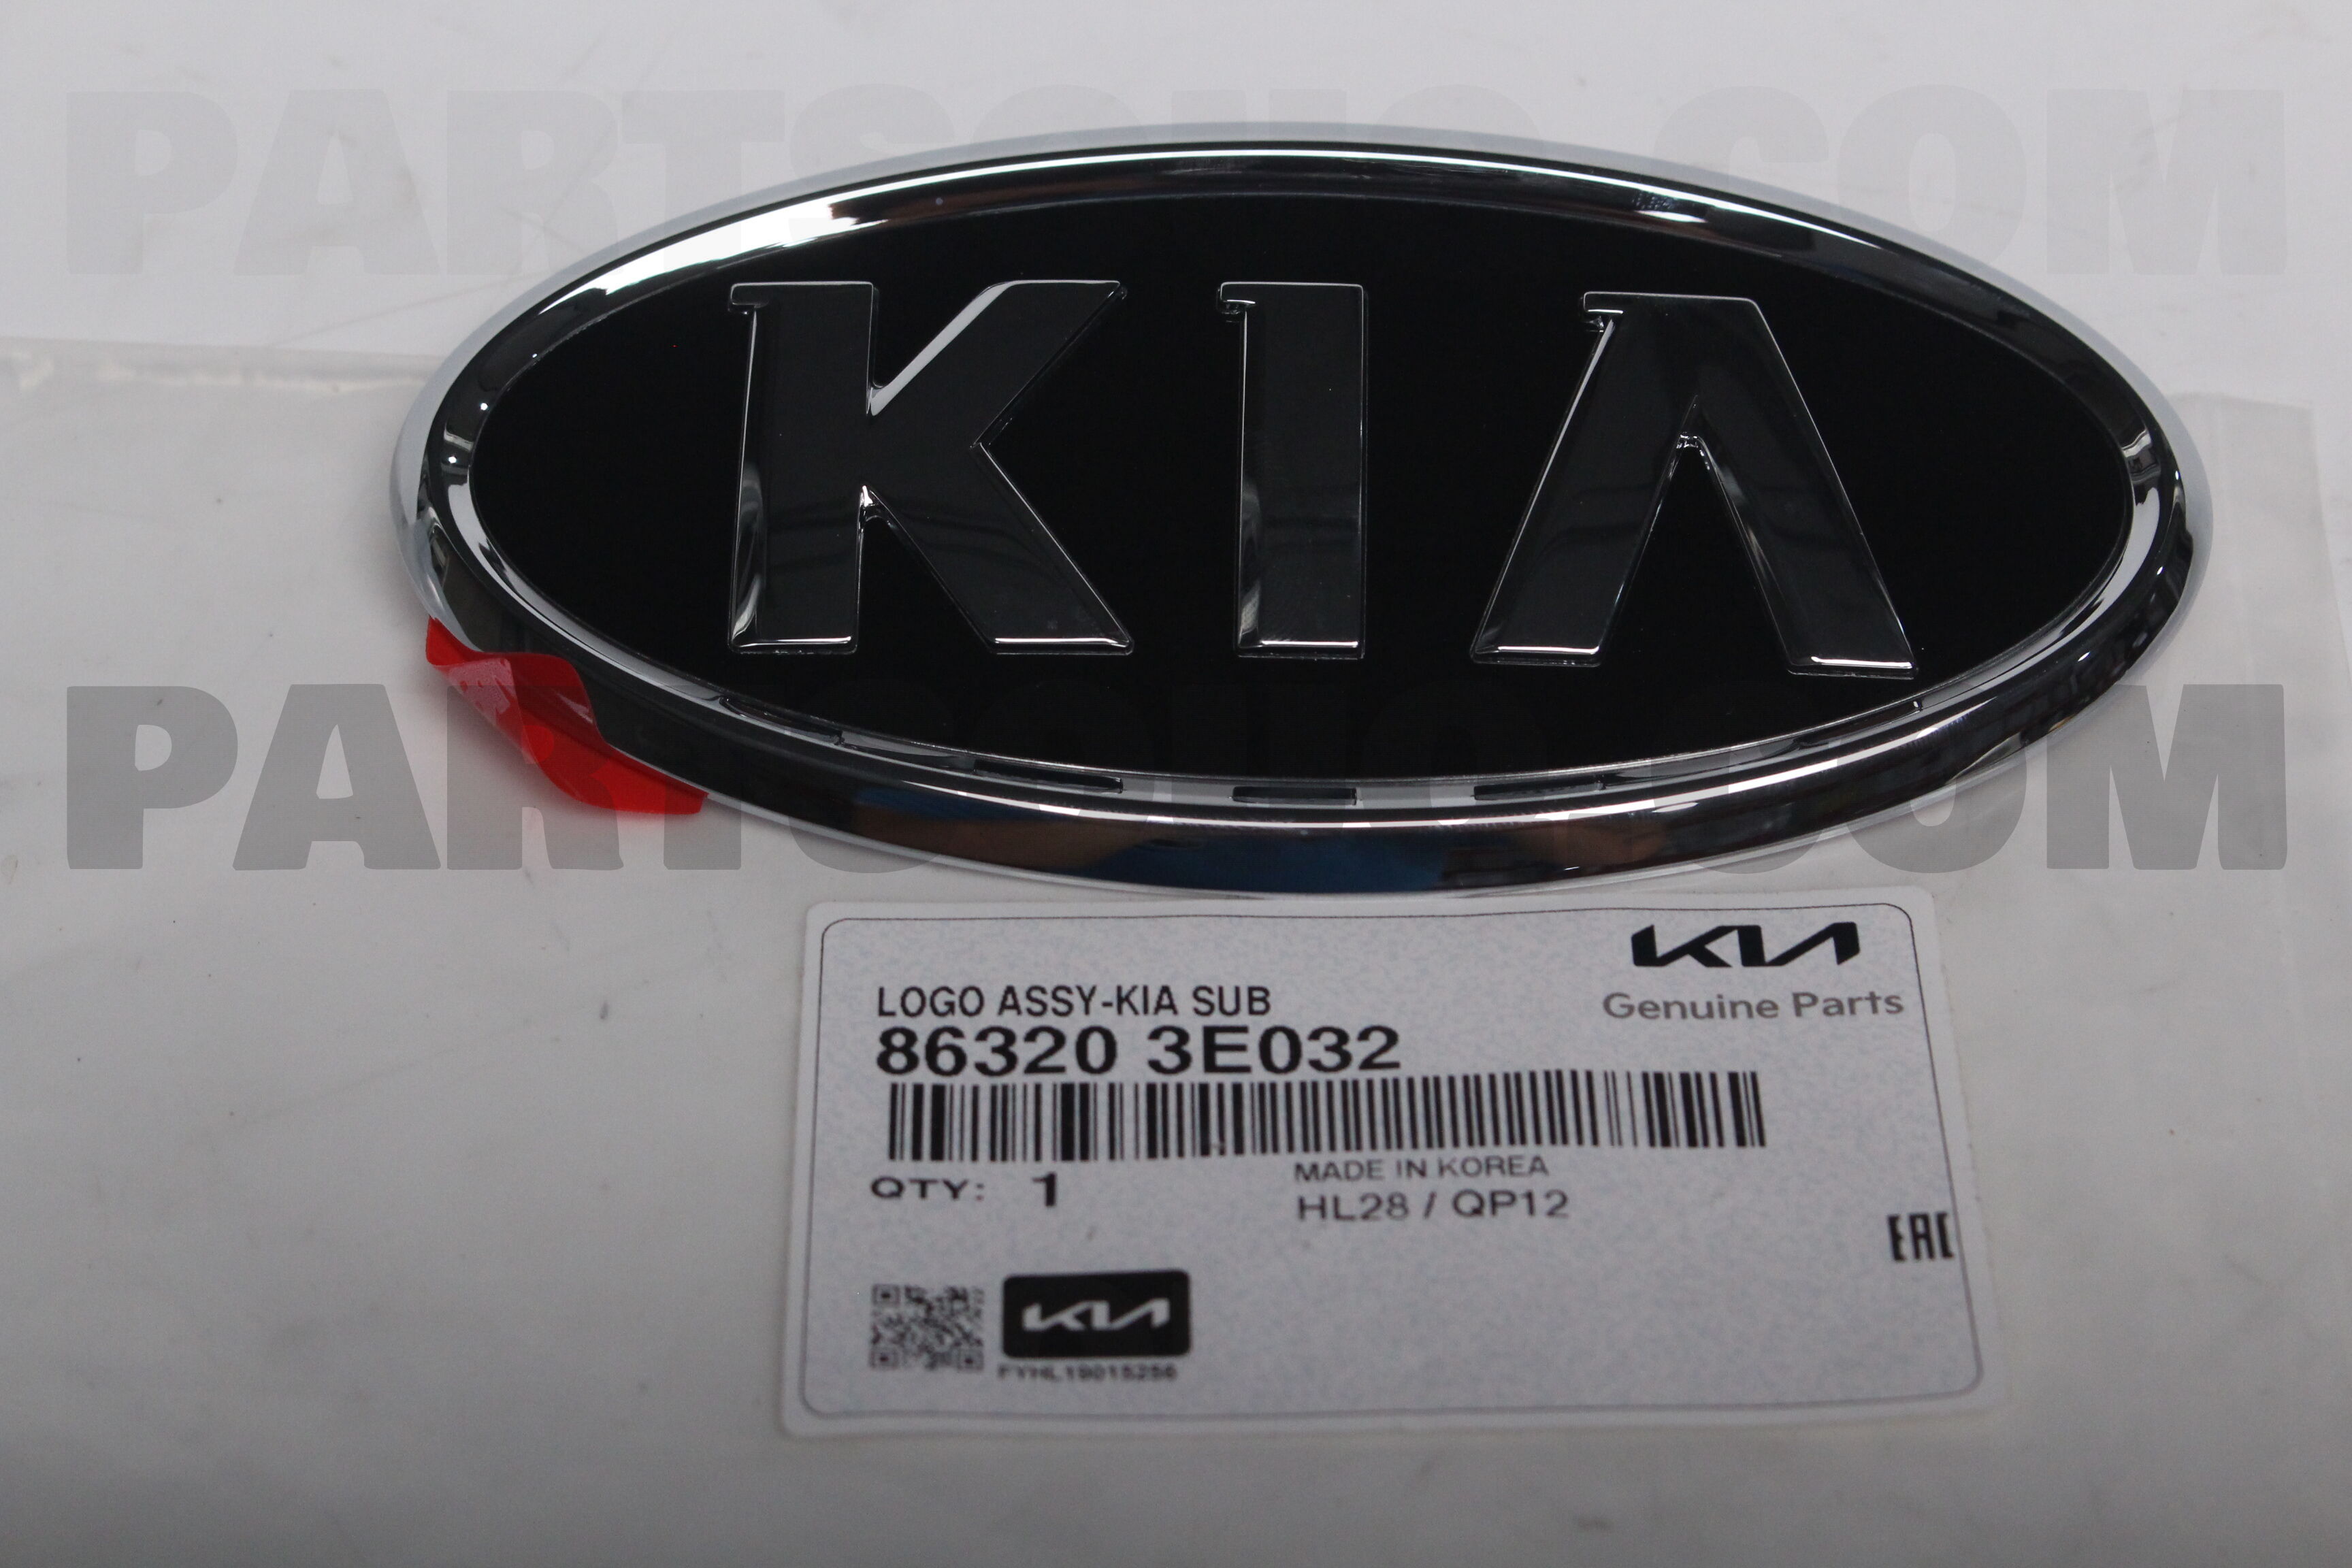 2014-2016 Kia Forte Hatchback  Front & Rear Emblem Vinyl Overlay Set -  Gloss Black Background with Logo Color of your Choice + Matching Steering  Wheel Emblem by Premium Auto Styling